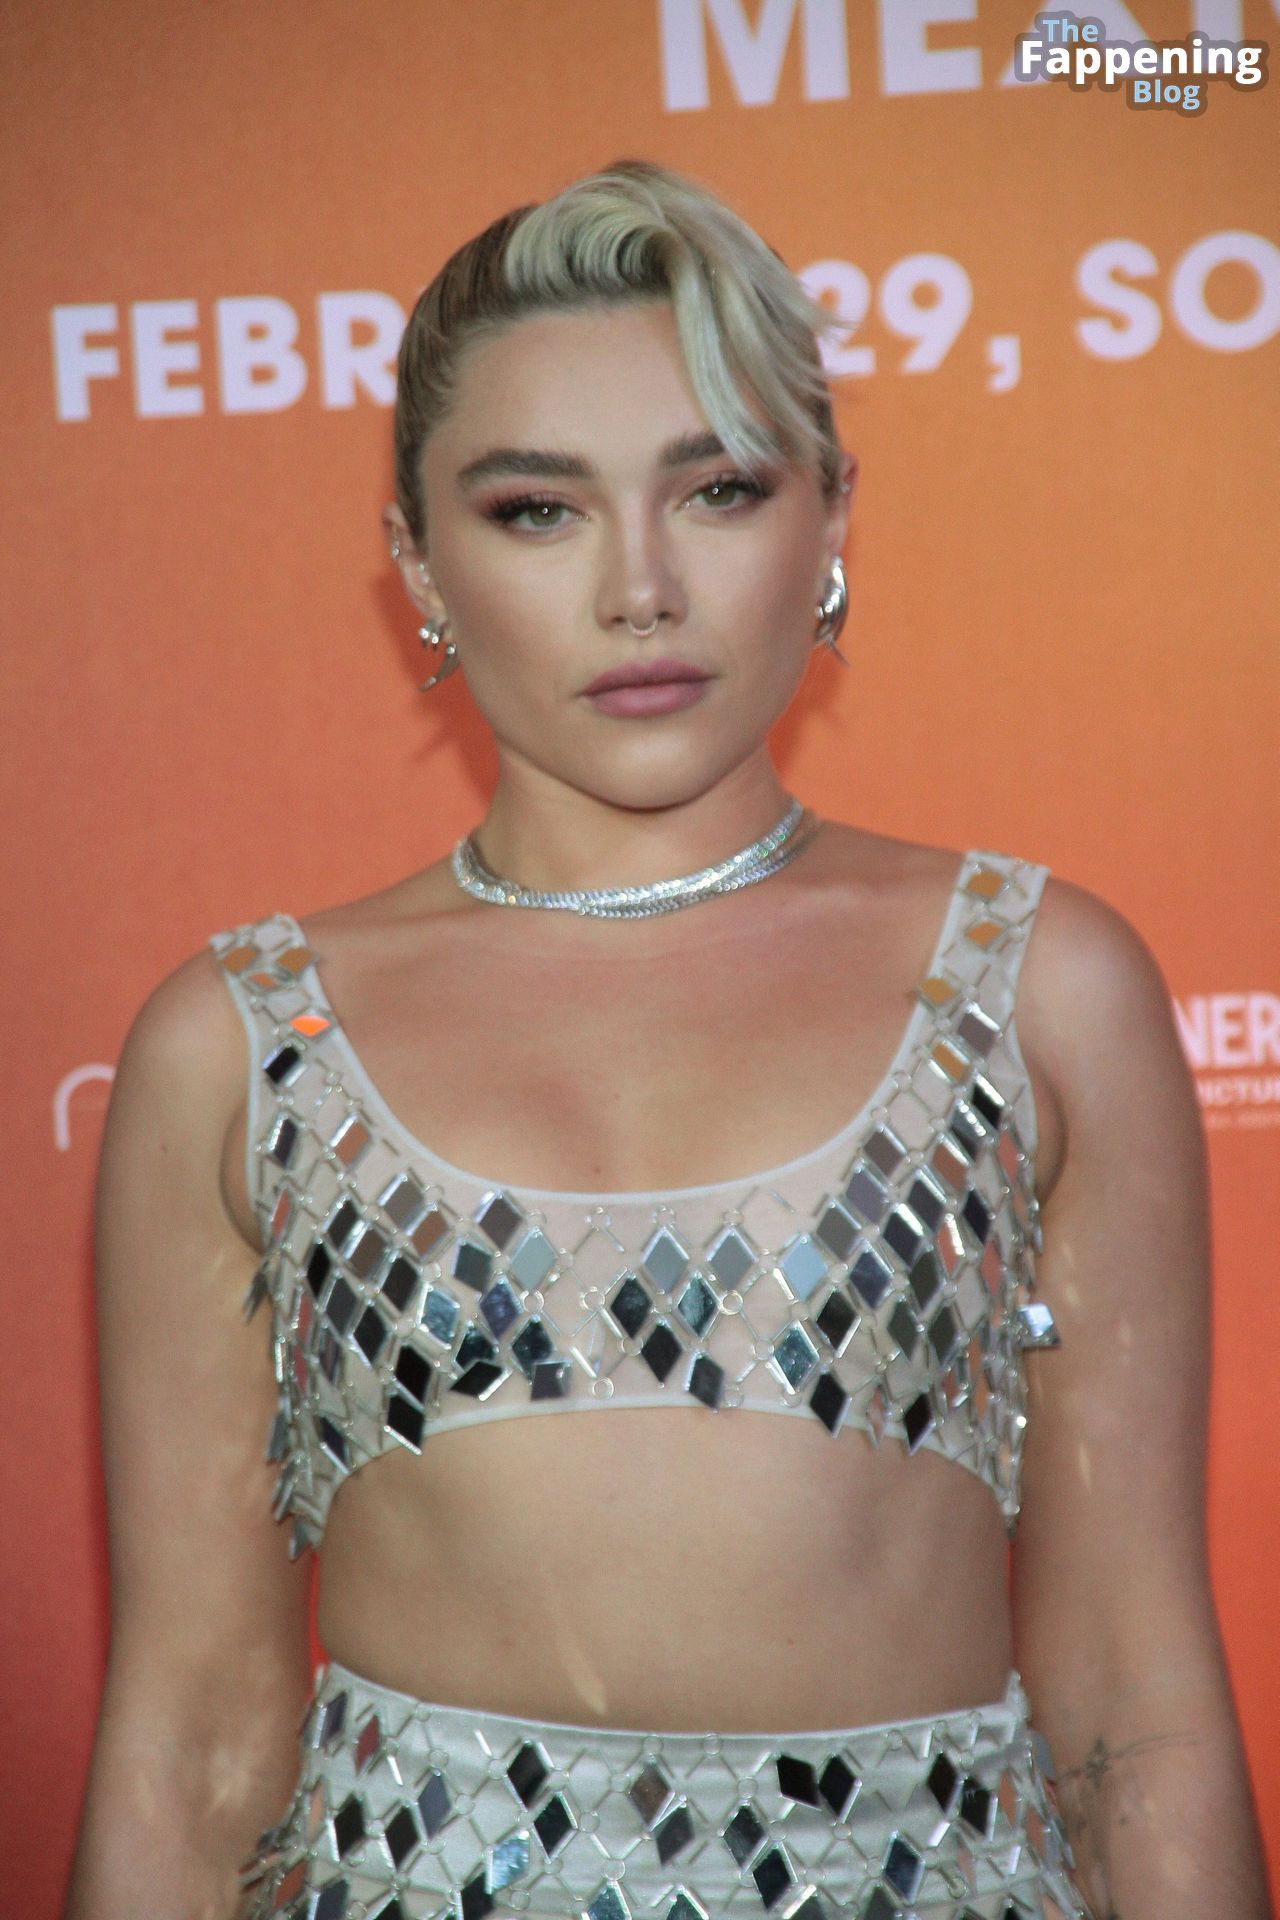 Florence-Pugh-Sexy-34-The-Fappening-Blog.jpg